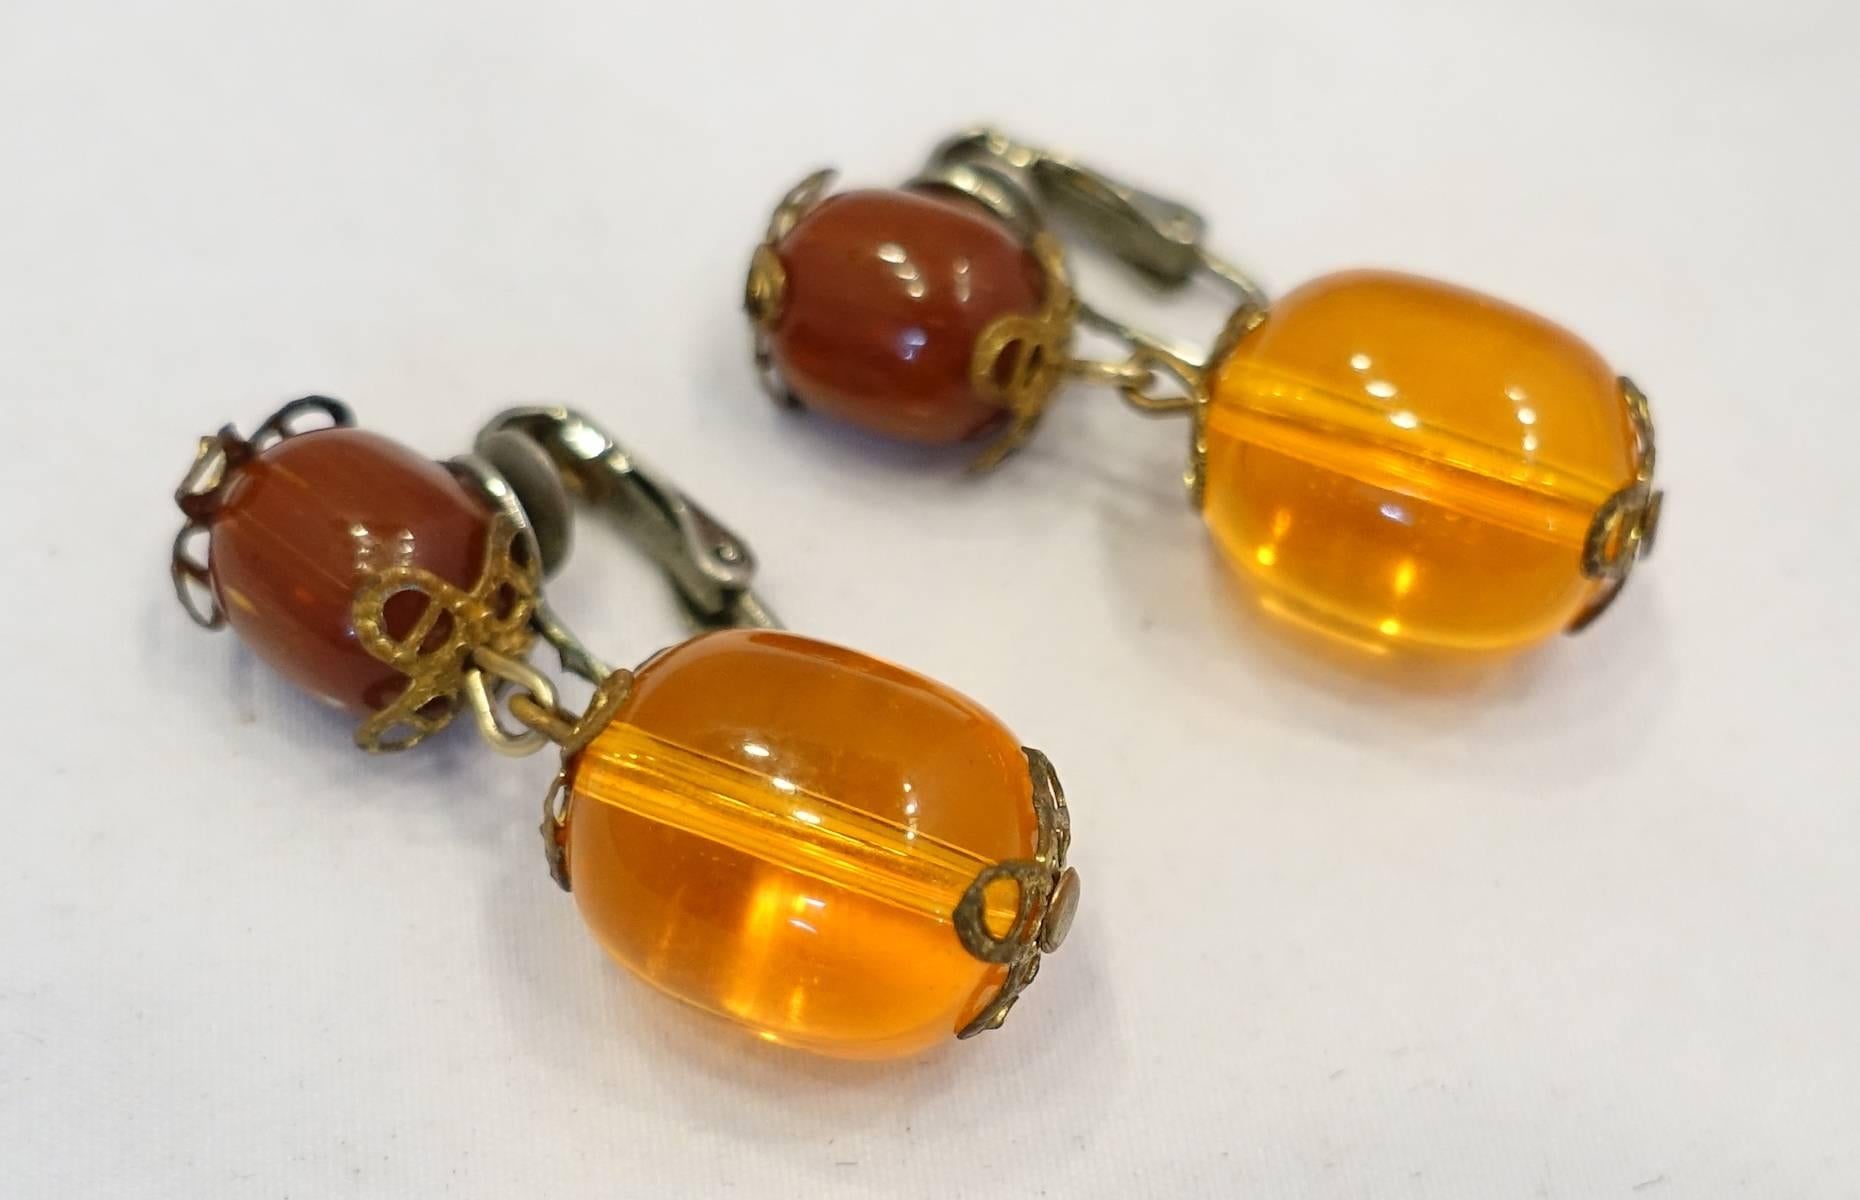 These vintage 1960s earrings feature a red bead top with a faux amber drop in a silver tone setting. These clip earrings measure 1-1/2” x 1/4” and are in excellent condition.